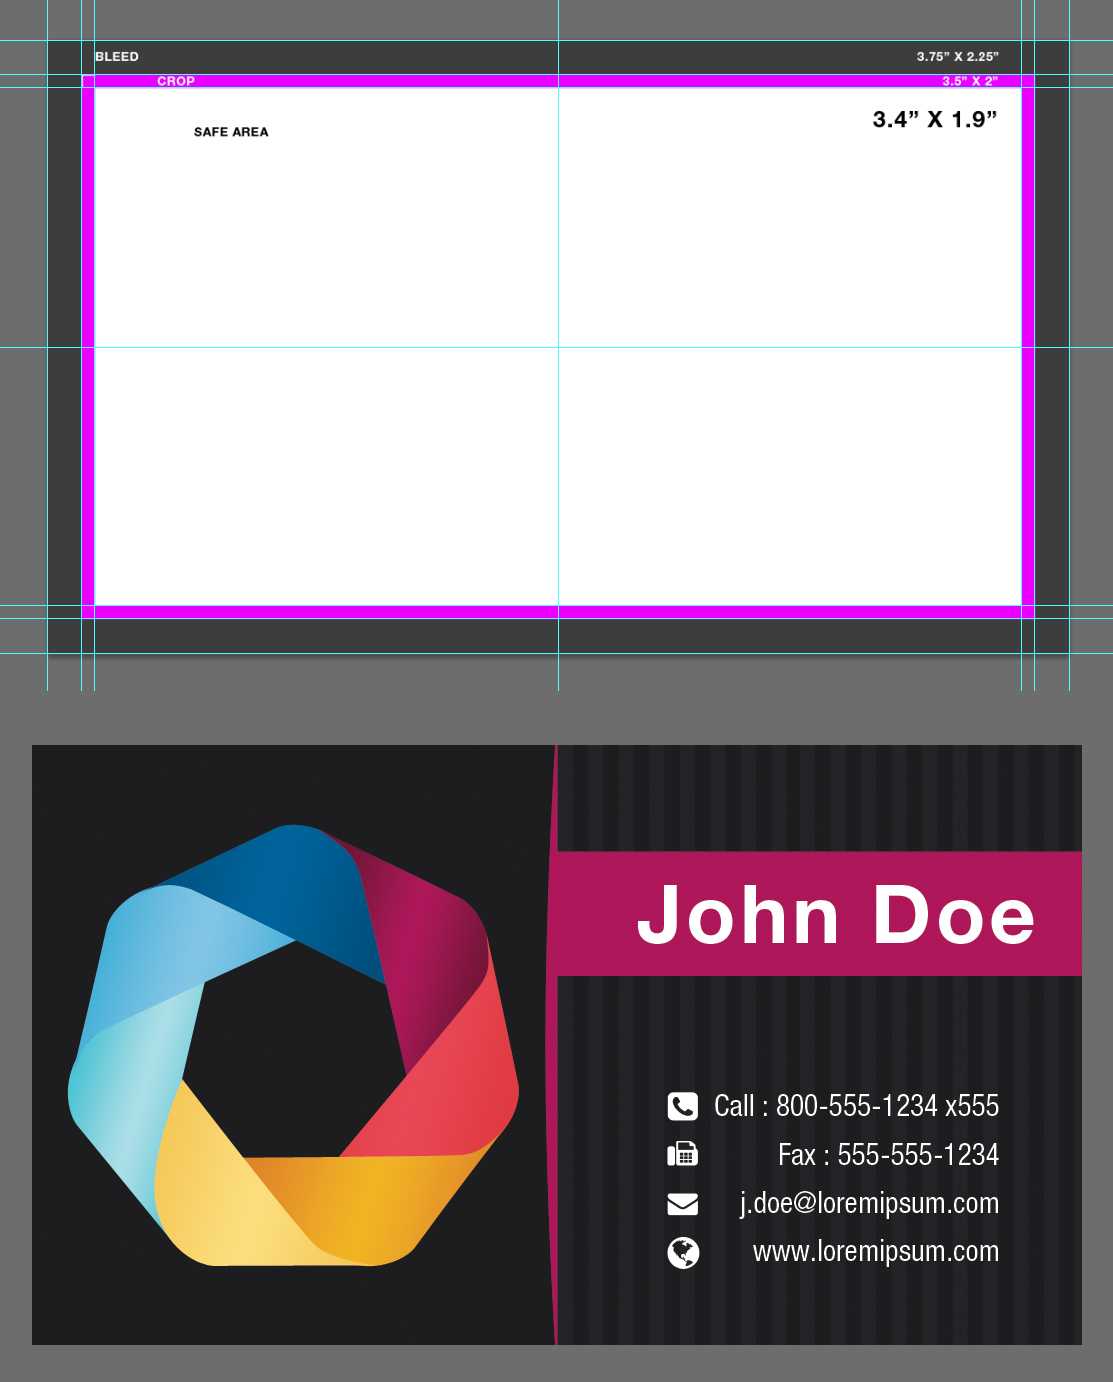 Blank Business Card Template Psdxxdigipxx On Deviantart Throughout Photoshop Business Card Template With Bleed